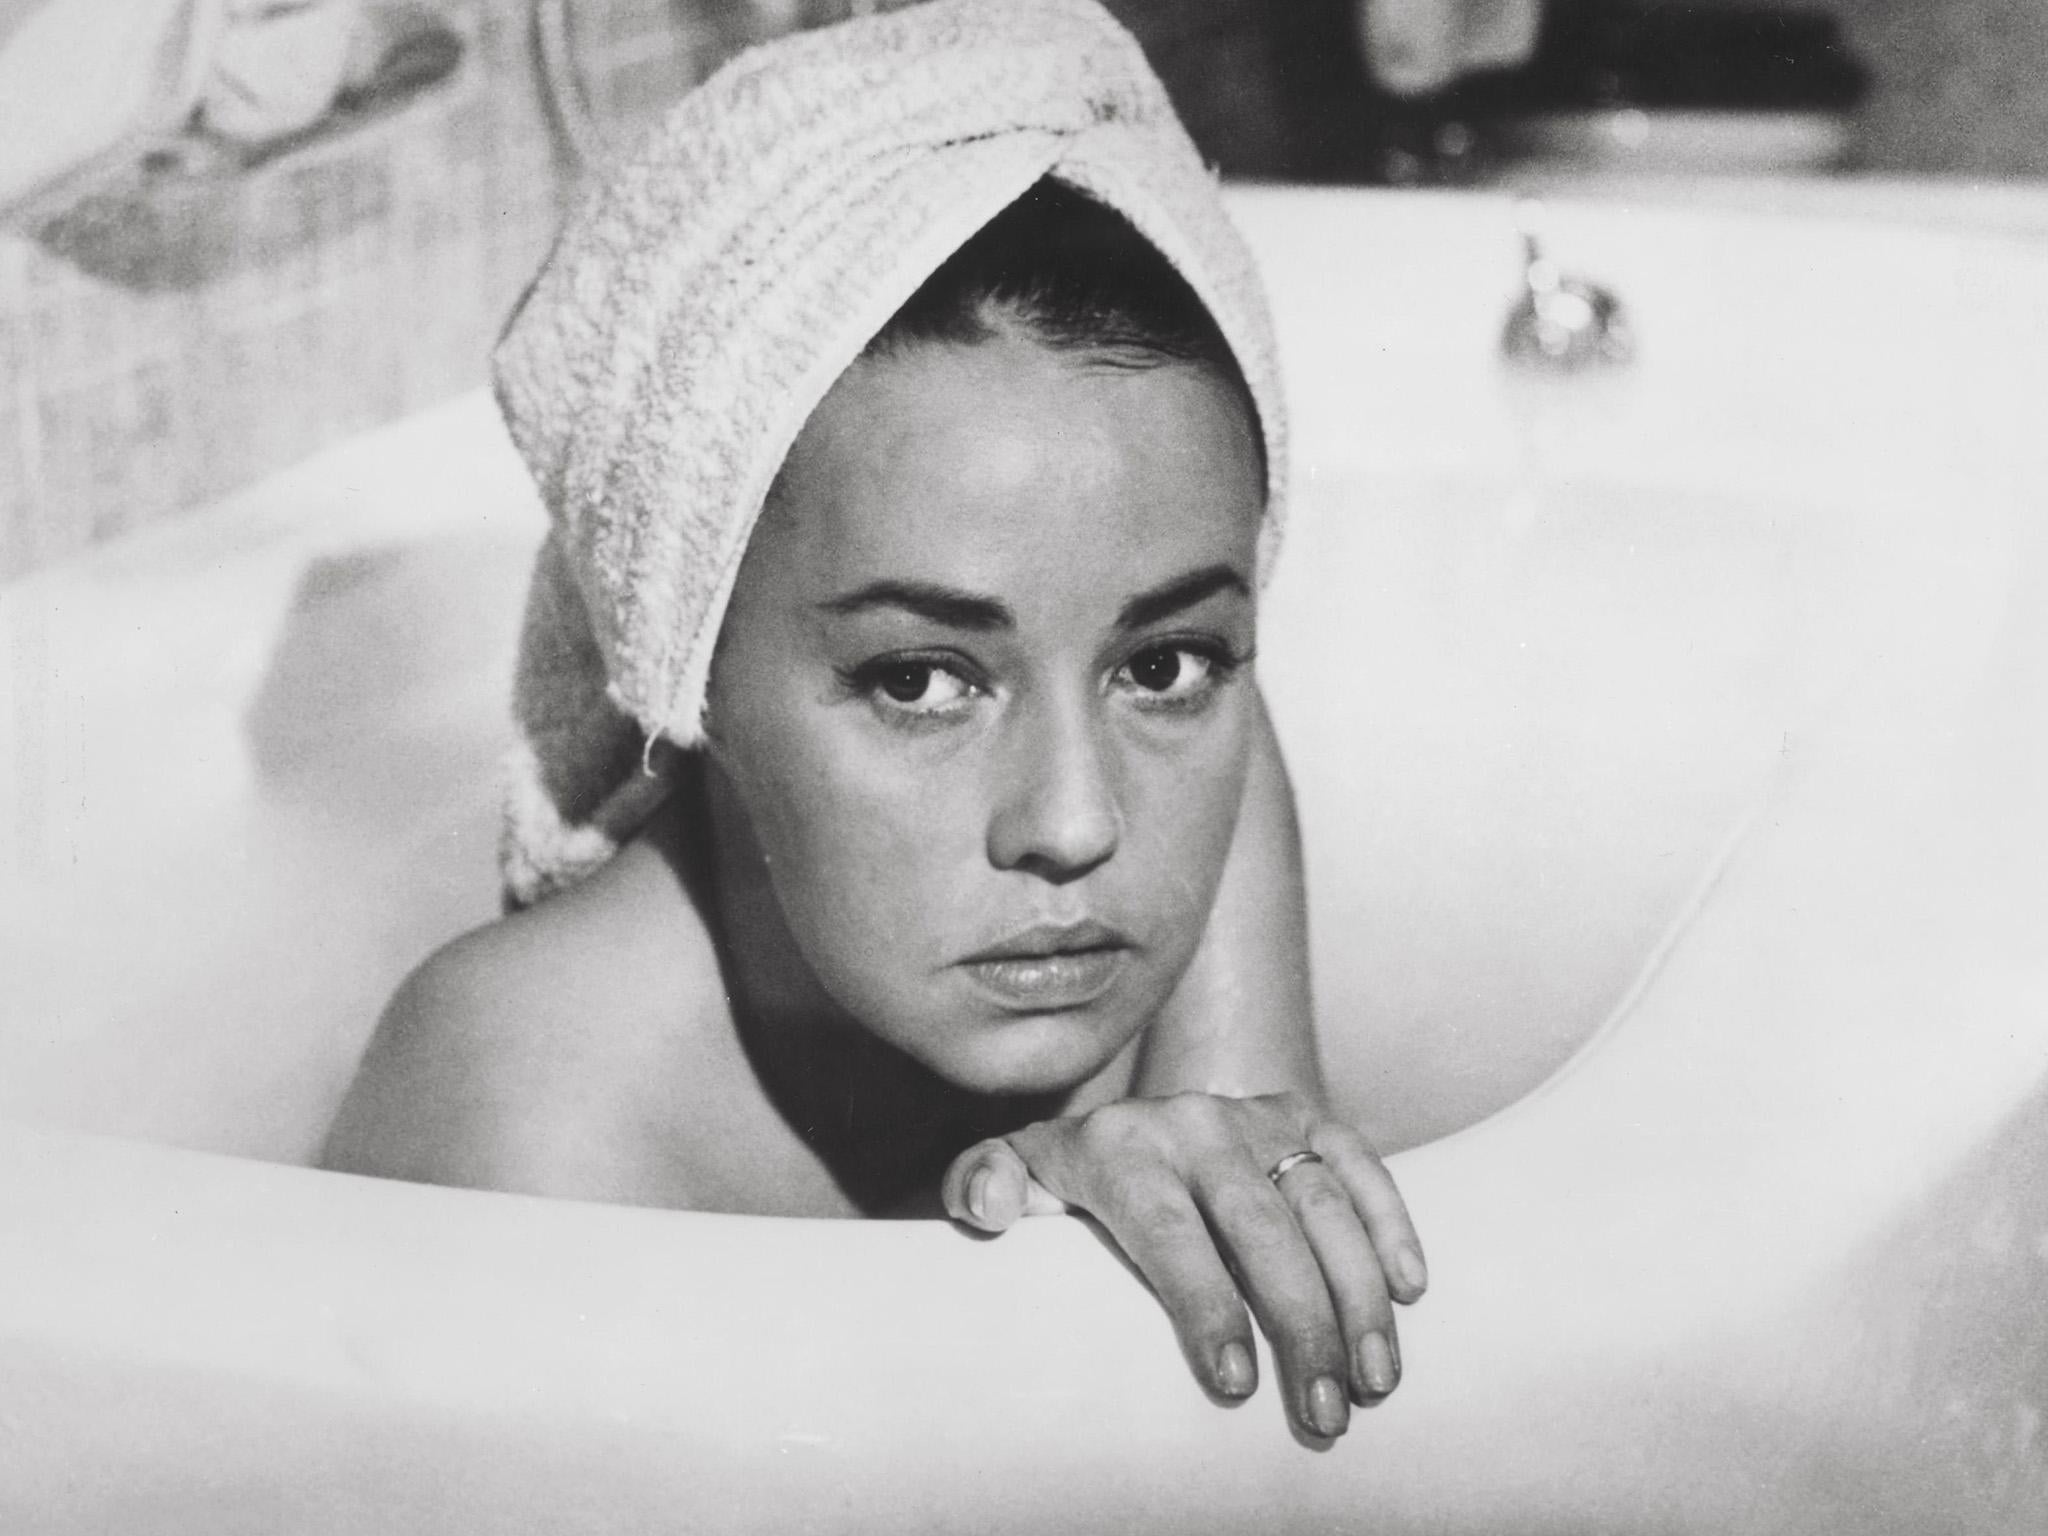 ‘La Notte’ (1960) tells the story of a married couple with a deteriorating relationship